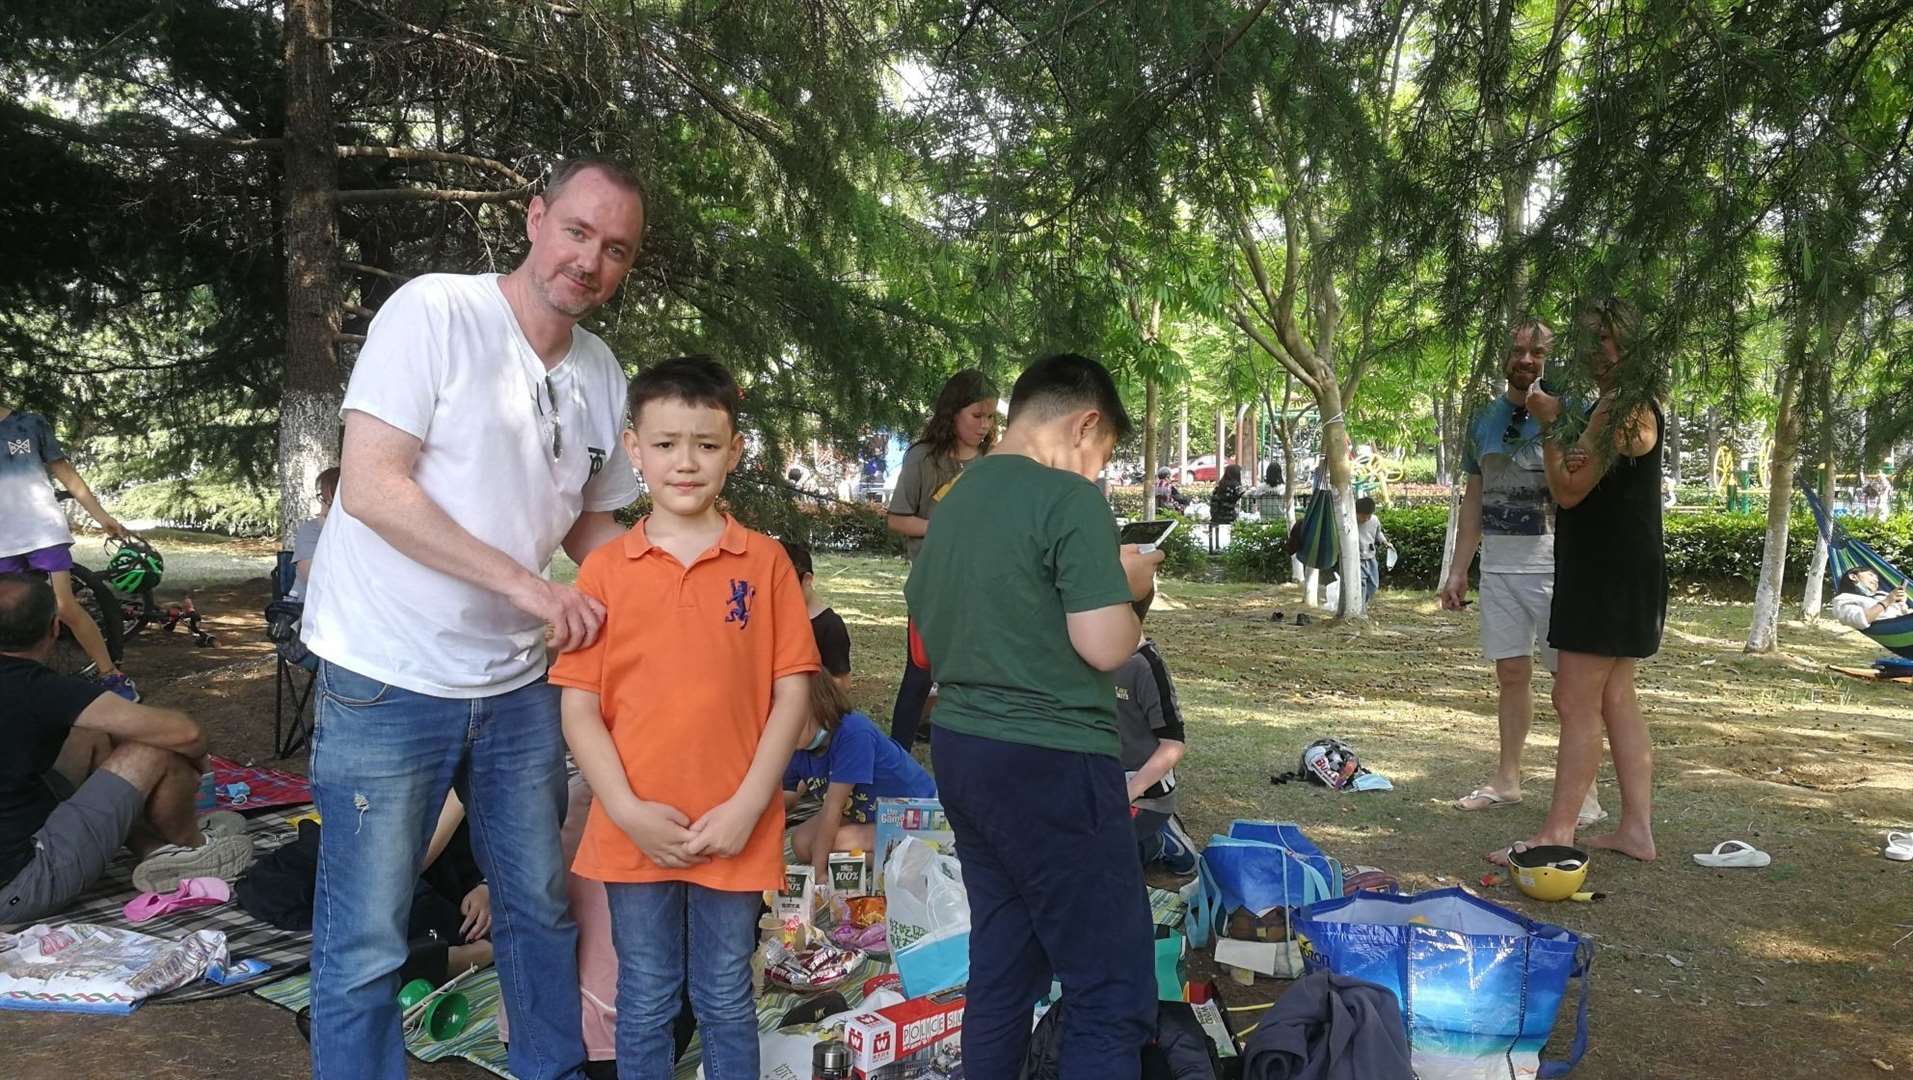 Kevin at his son Connor's 10th birthday party in a Suzhou park on Sunday. They were joined by around 12 children and eight adults.